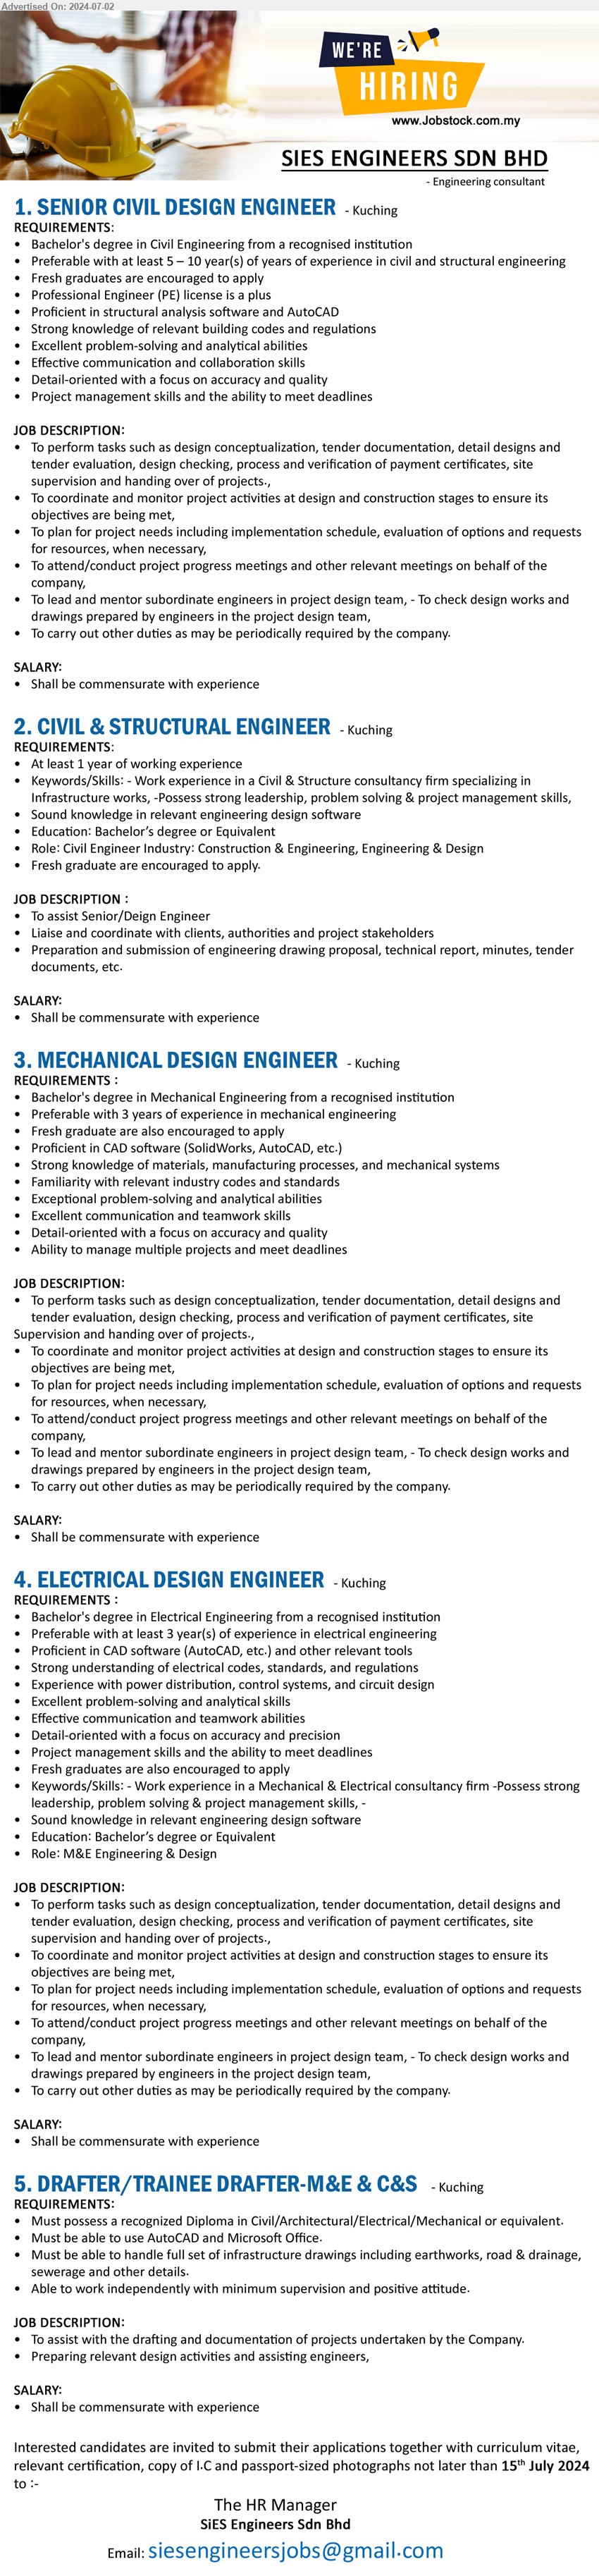 SIES ENGINEERS SDN BHD - 1. SENIOR CIVIL DESIGN ENGINEER (Kuching), Bachelor's Degree in Civil Engineering from a recognised institution,...
2. CIVIL & STRUCTURAL ENGINEER (Kuching), Education: Bachelor’s Degree, Role: Civil Engineer Industry: Construction & Engineering, Engineering & Design,...
3. MECHANICAL DESIGN ENGINEER  (Kuching), Bachelor's Degree in Mechanical Engineering from a recognised institution,...
4. ELECTRICAL DESIGN ENGINEER (Kuching), Bachelor's Degree in Electrical Engineering from a recognised institution,...
5. DRAFTER/TRAINEE DRAFTER-M&E & C&S  (Kuching), Diploma in Civil/Architectural/Electrical/Mechanical,...
Email resume to ...